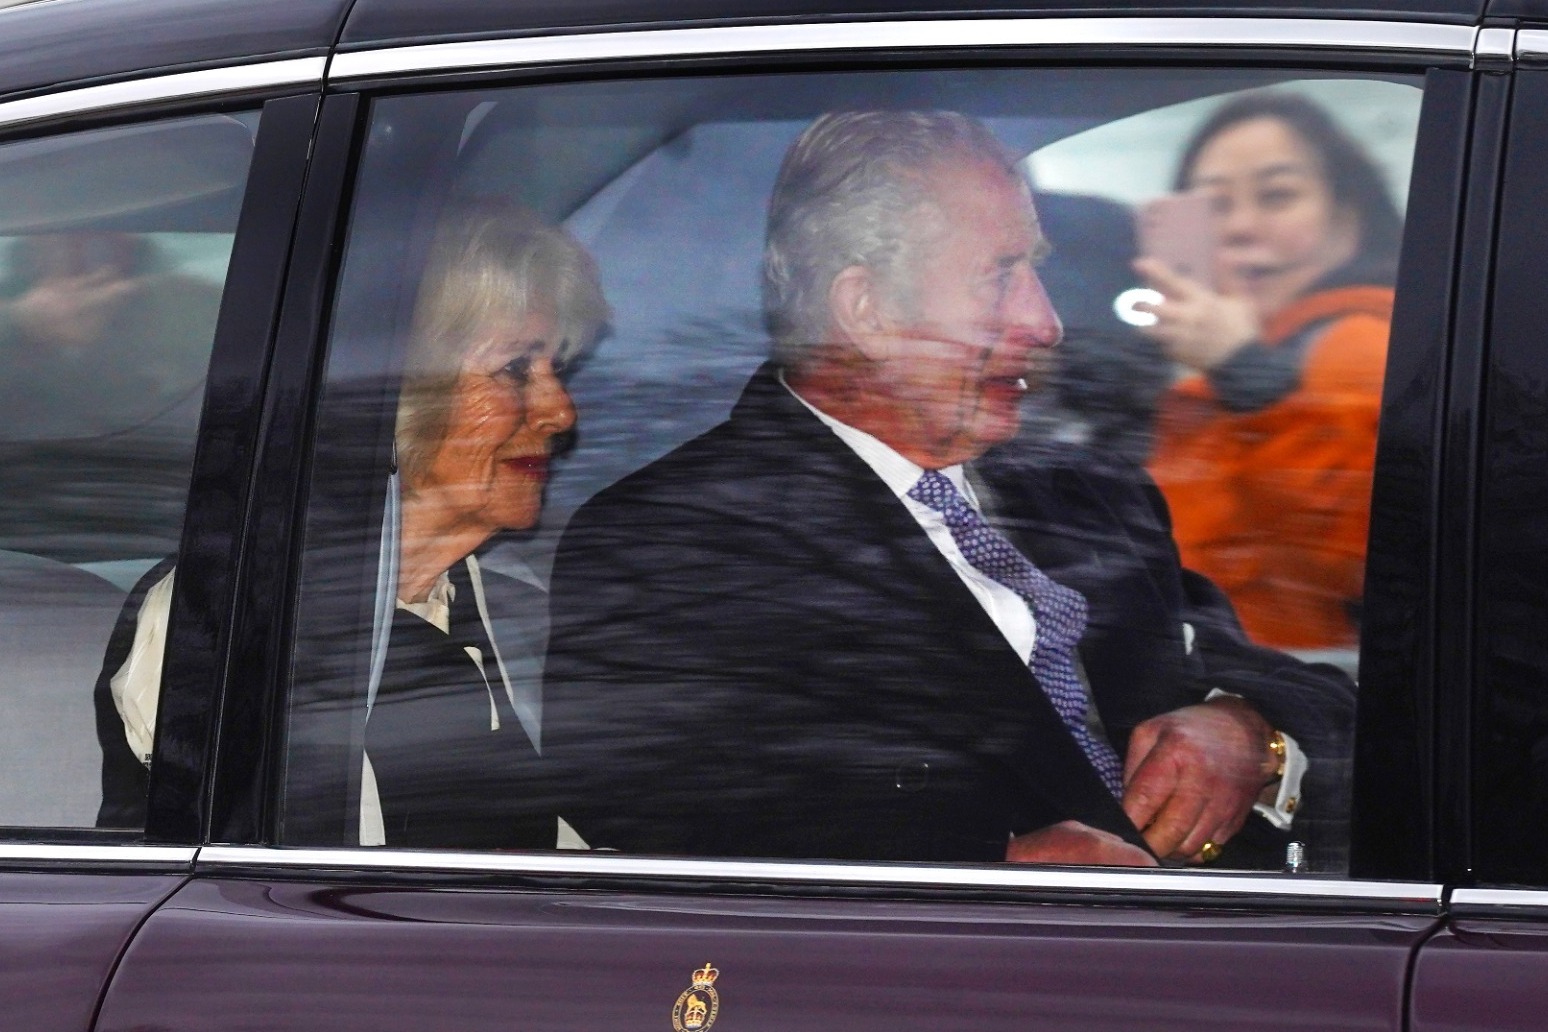 King seen in public for first time since cancer diagnosis